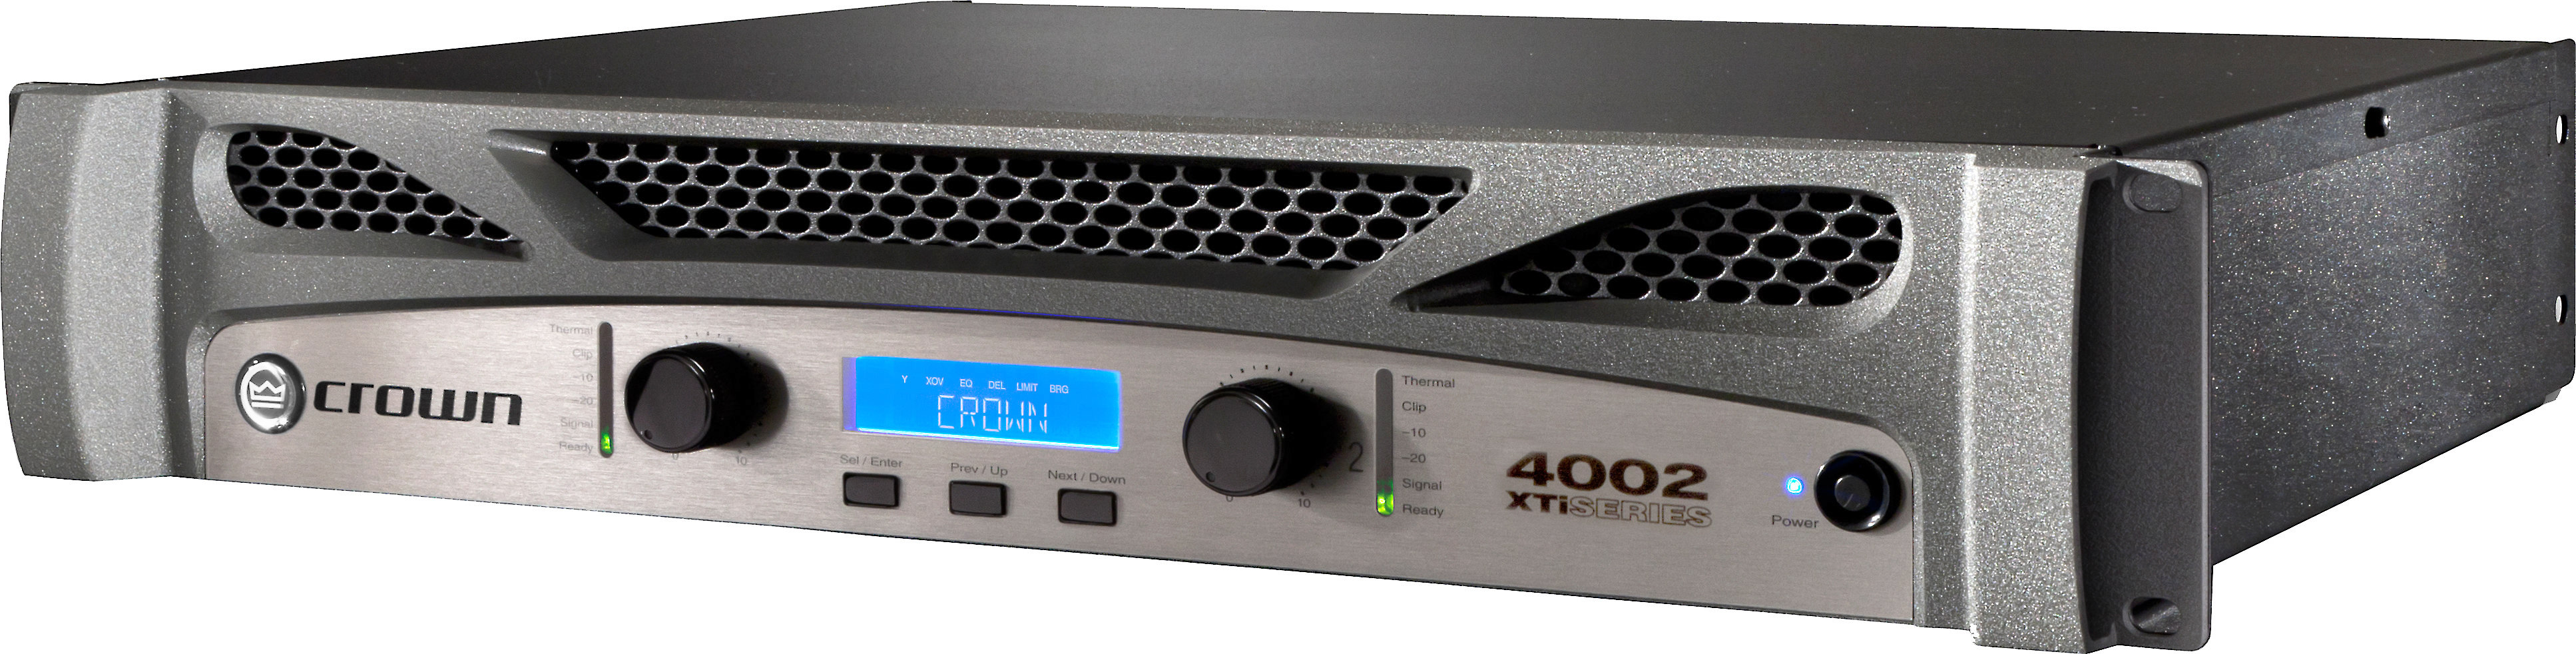 renewable resource enthusiastic alley Product Videos: Crown XTi 4002 Power amplifier — 650W x 2 at 8 ohms, 3,200W  x 1 at 4 ohms bridged at Crutchfield